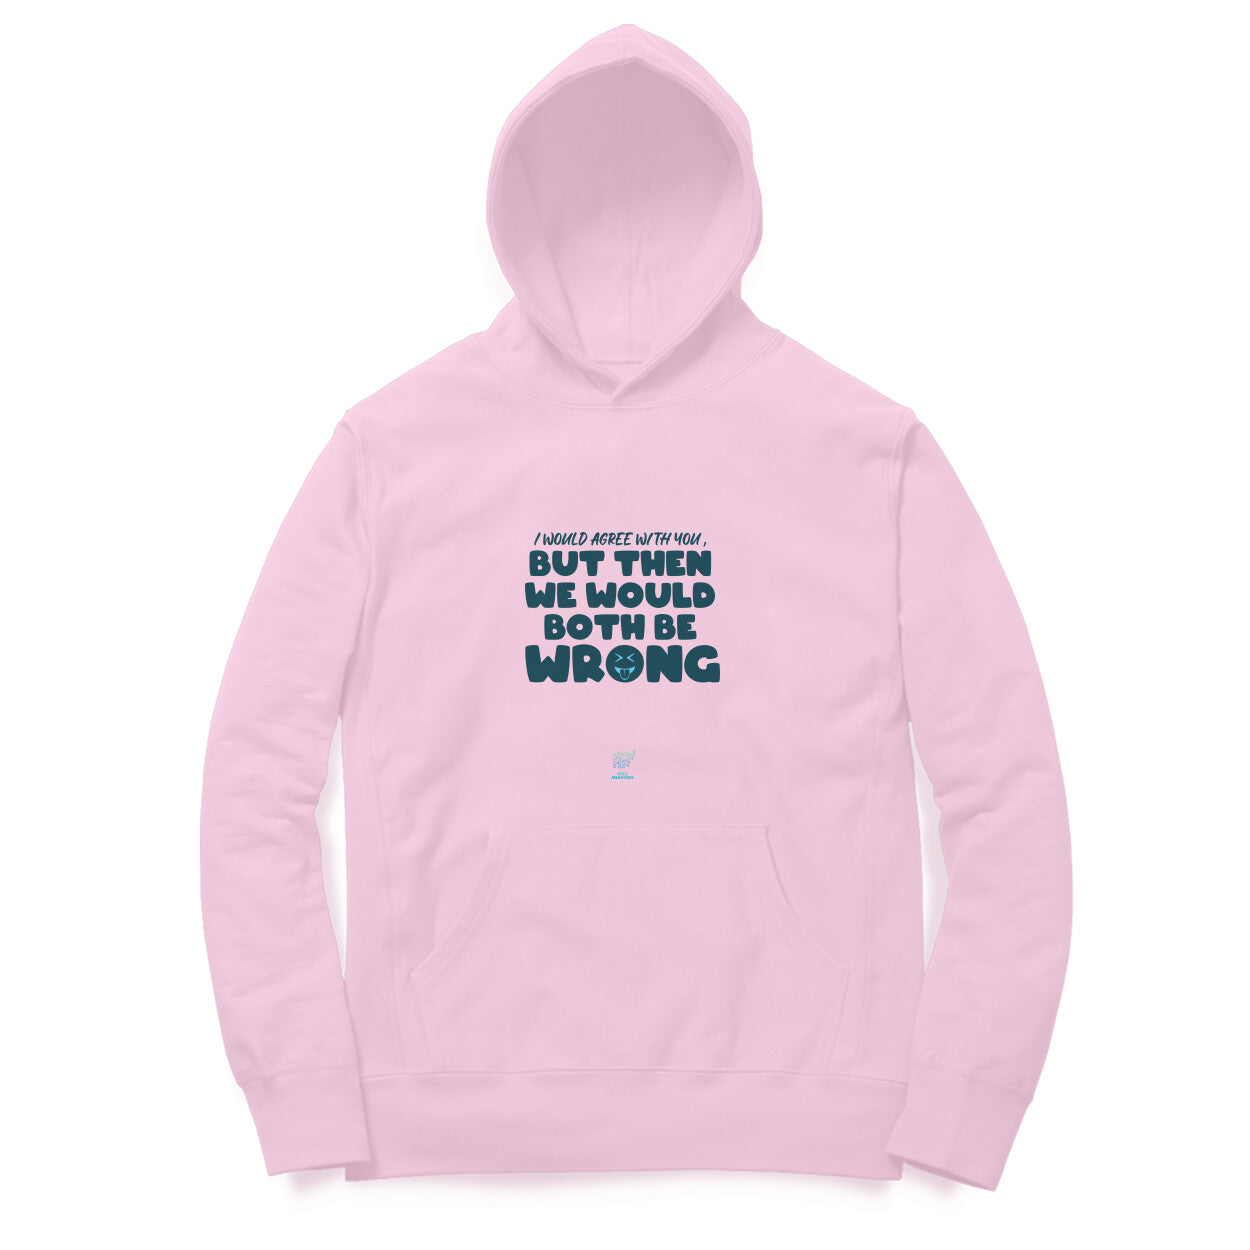 We Both would be wrong - Hoodies - Unisex